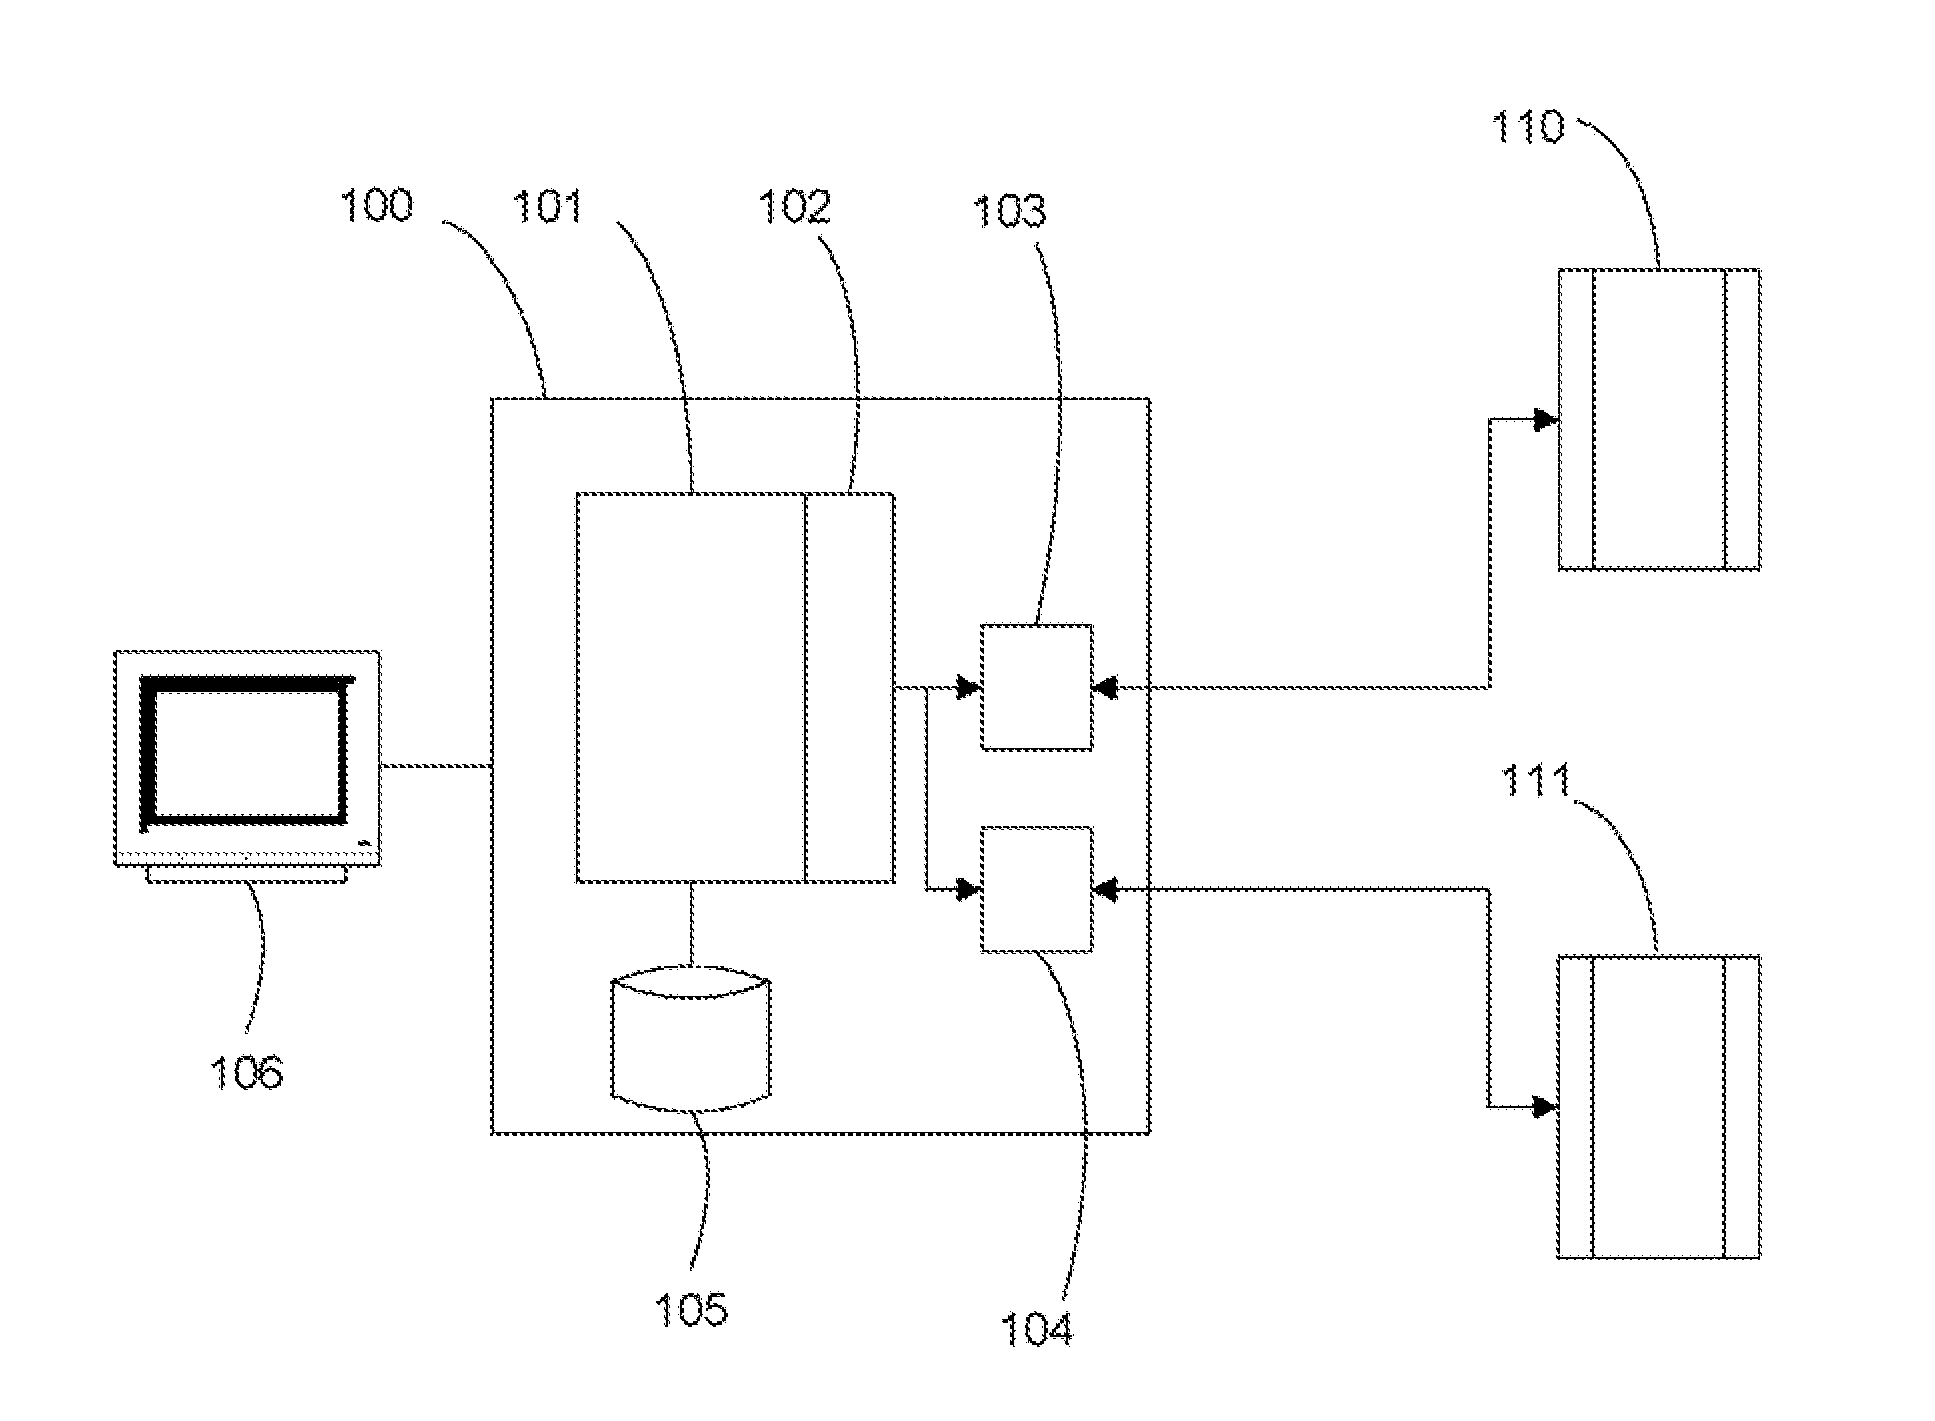 Data quality enrichment integration and evaluation system